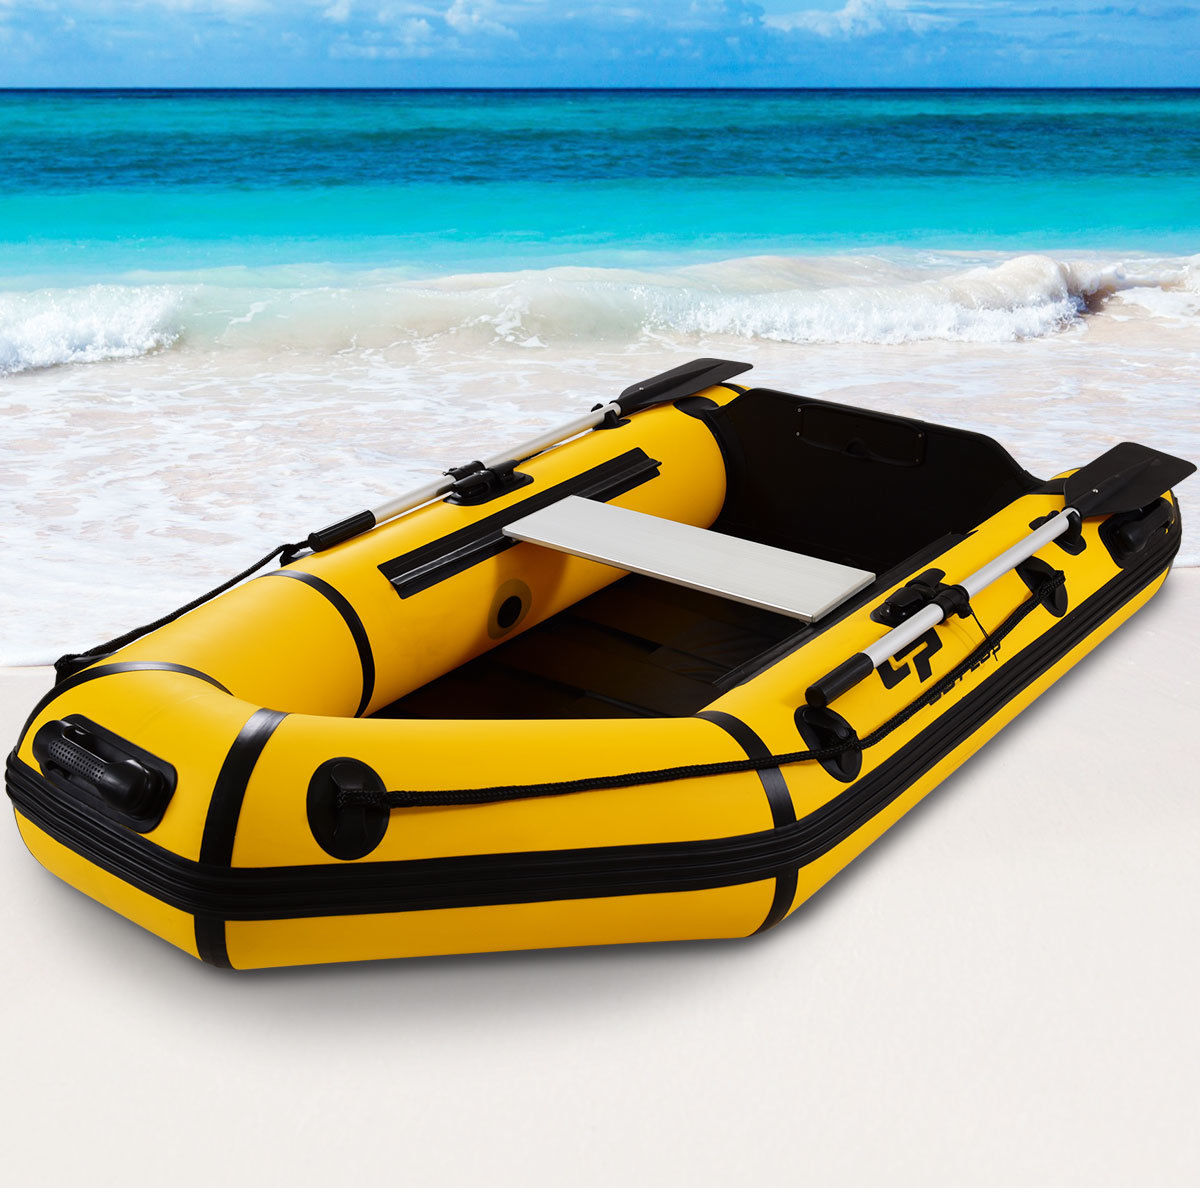 Goplus 2 Person 7.5FT Inflatable Dinghy Boat Fishing Tender Rafting Water (Best Inflatable Boat For Ocean Fishing)